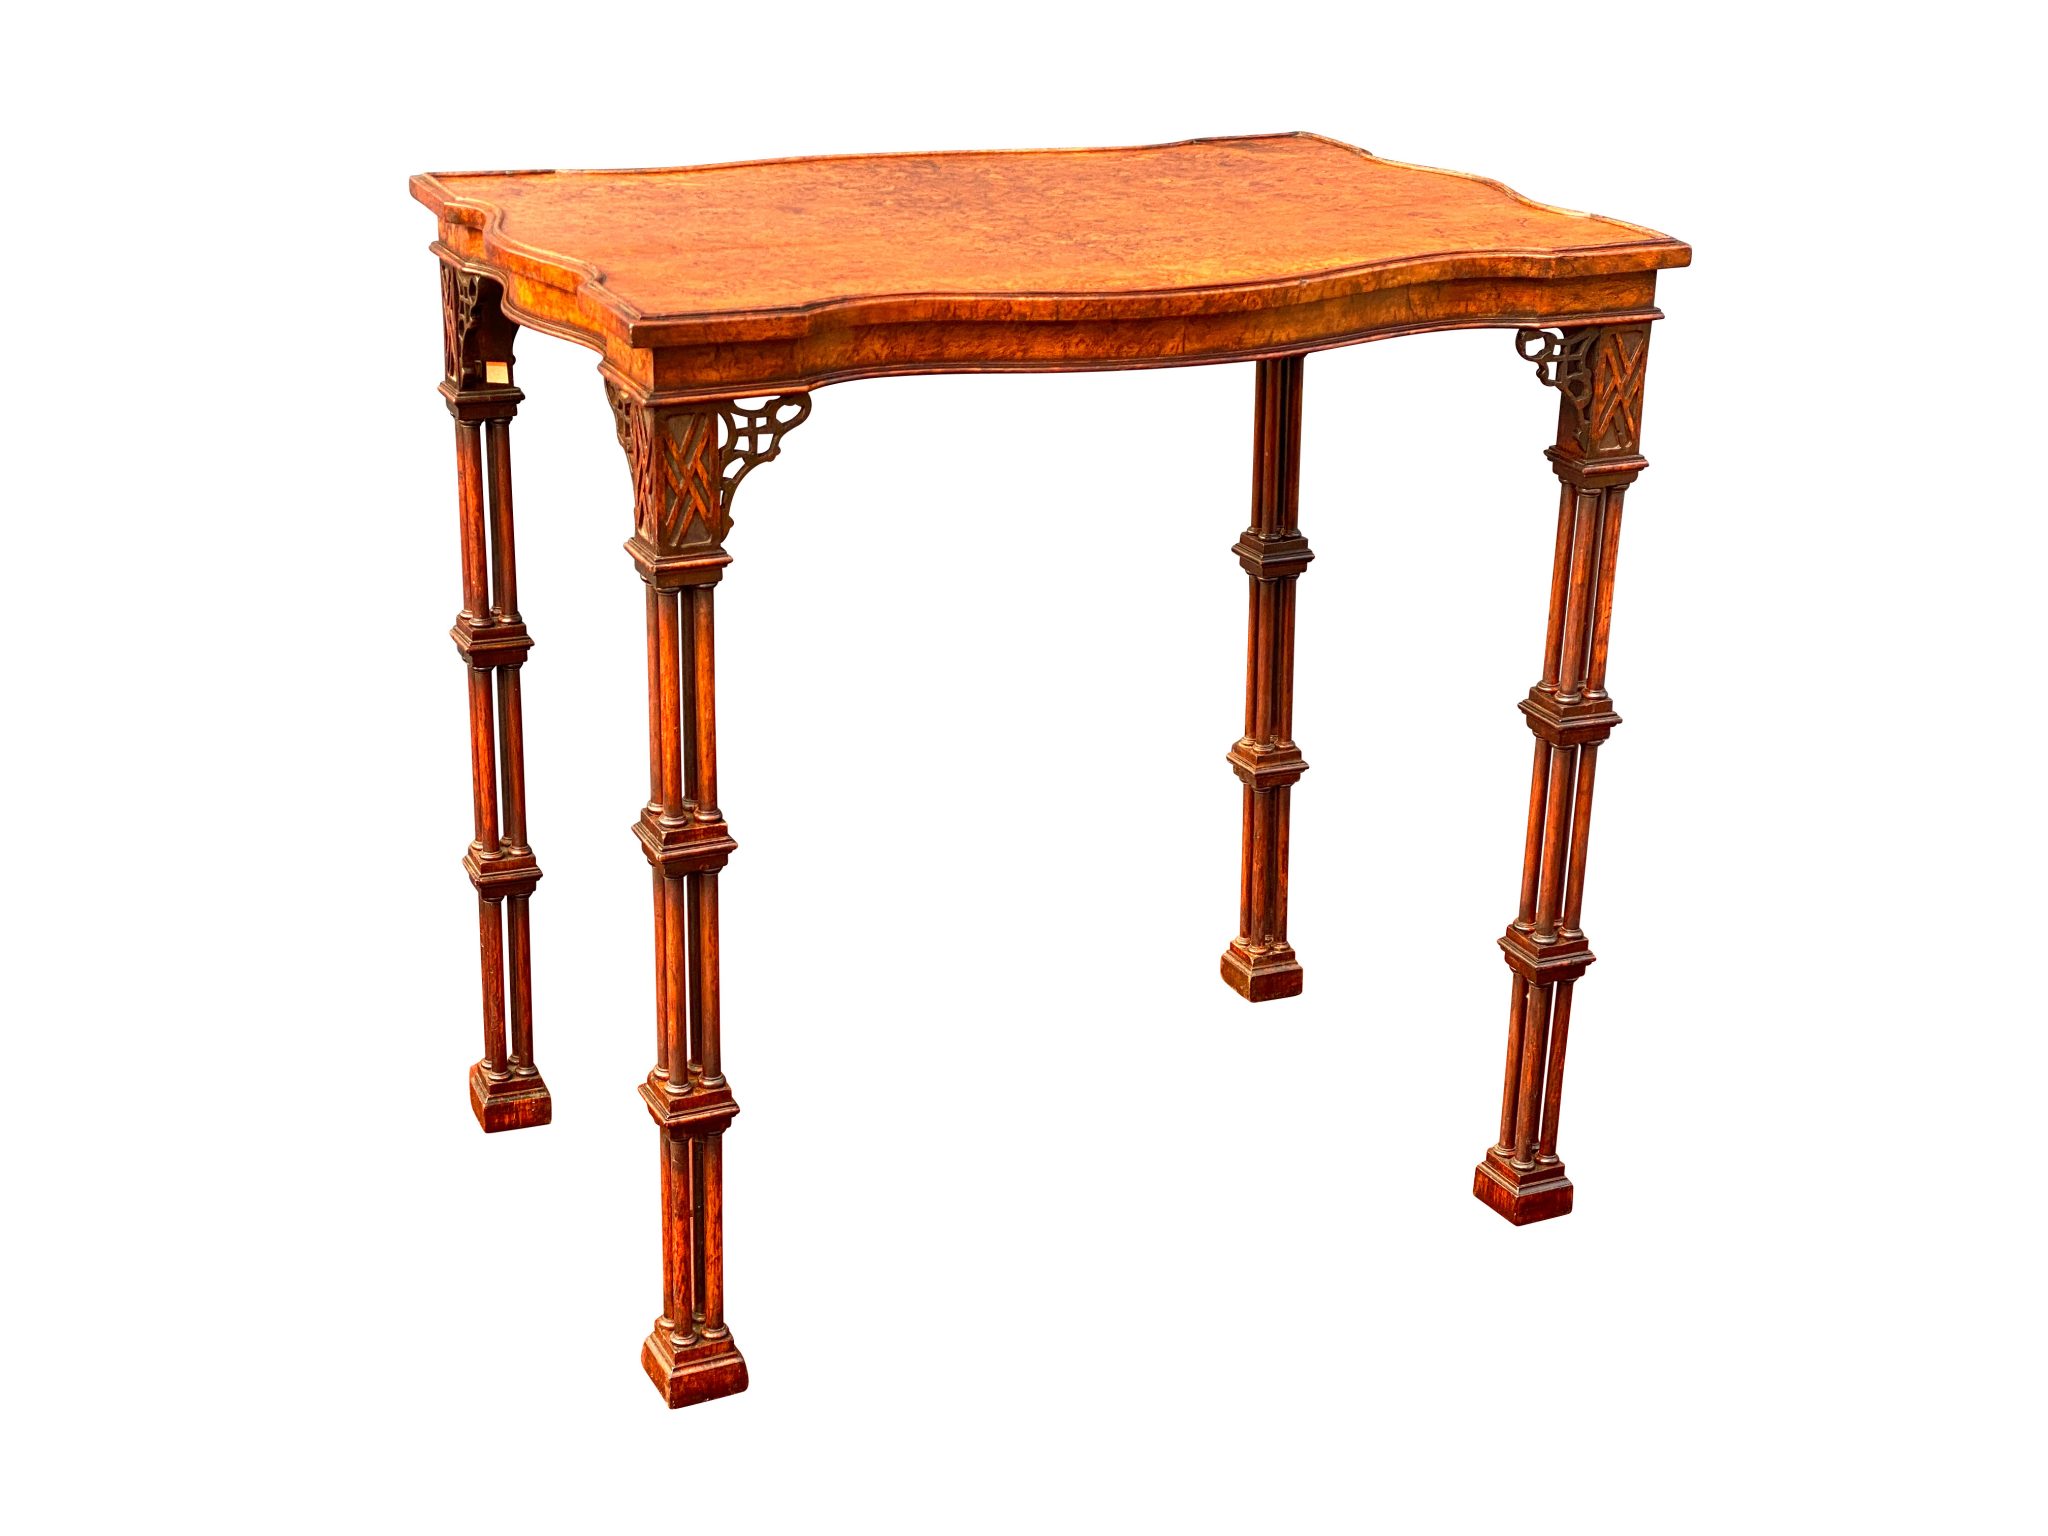 George III Style Burl Walnut and Mahogany China Table Attributed to Gillow